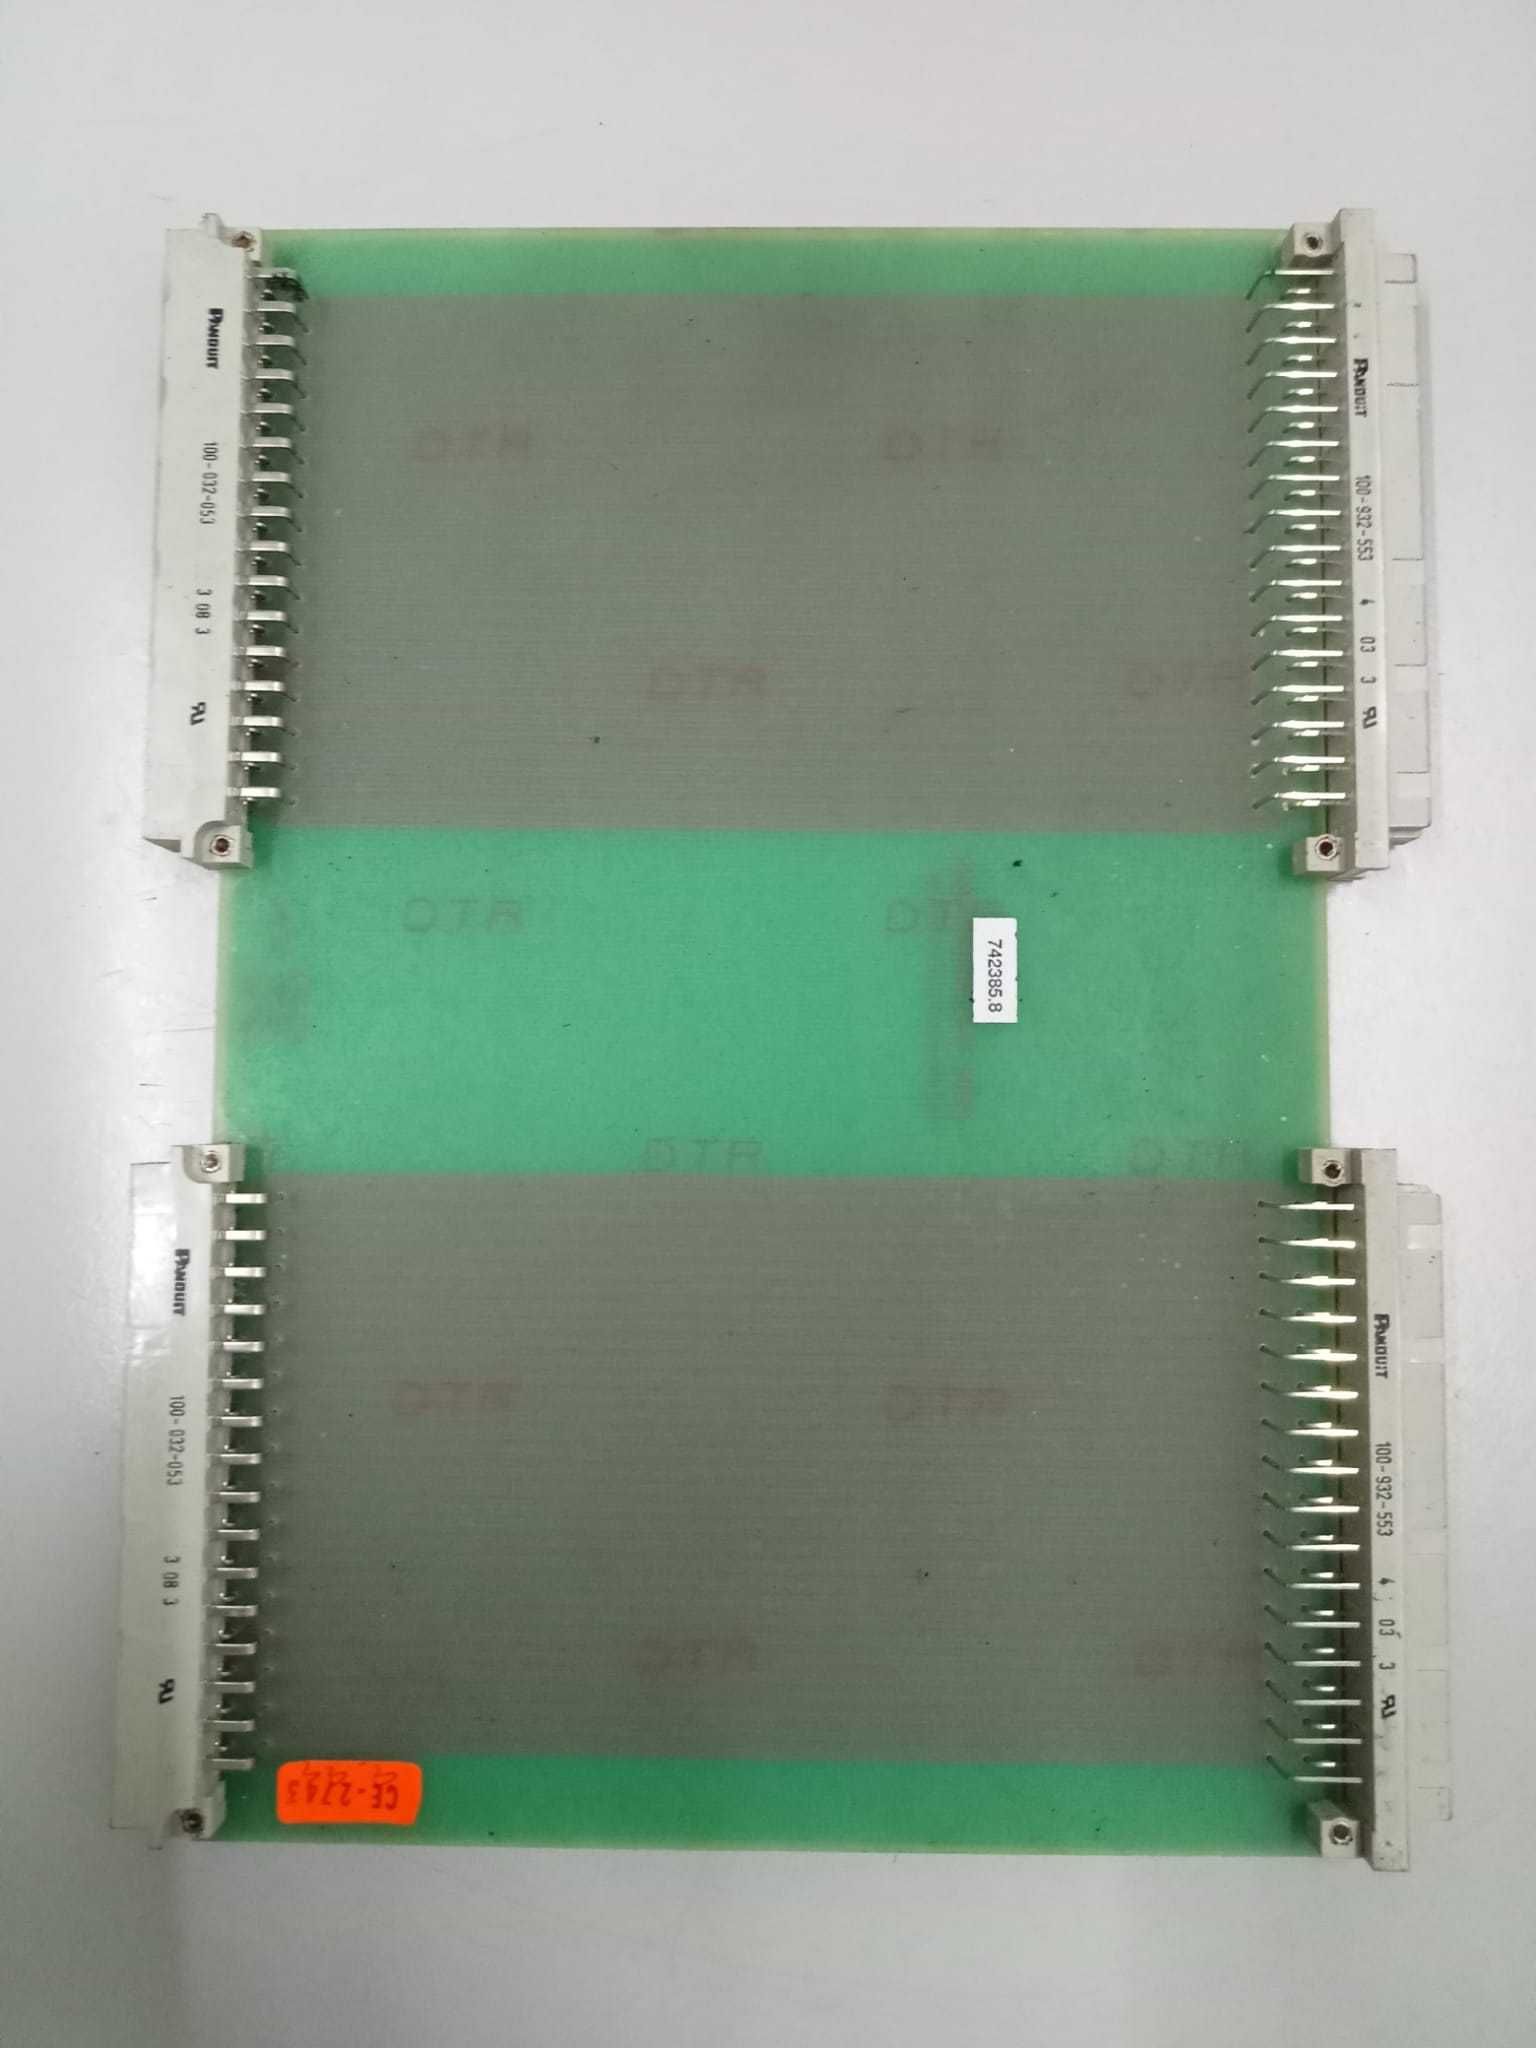 EXTENSION BOARD AGIE Zch.NR.614 482.9